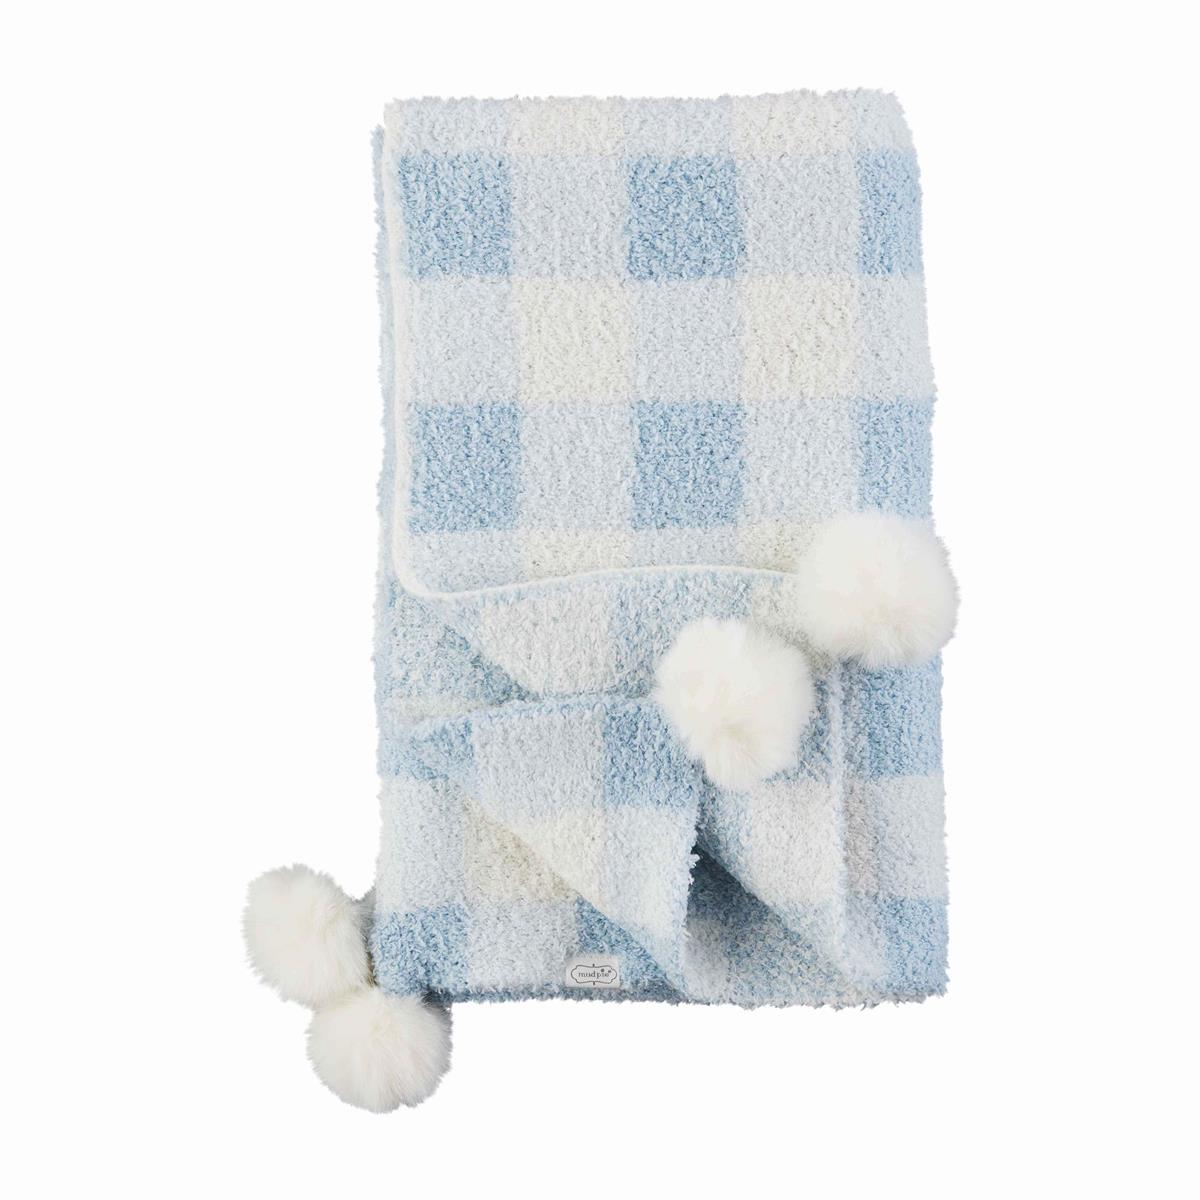 Gingham Baby Blanket in Blue - Madison's Niche 